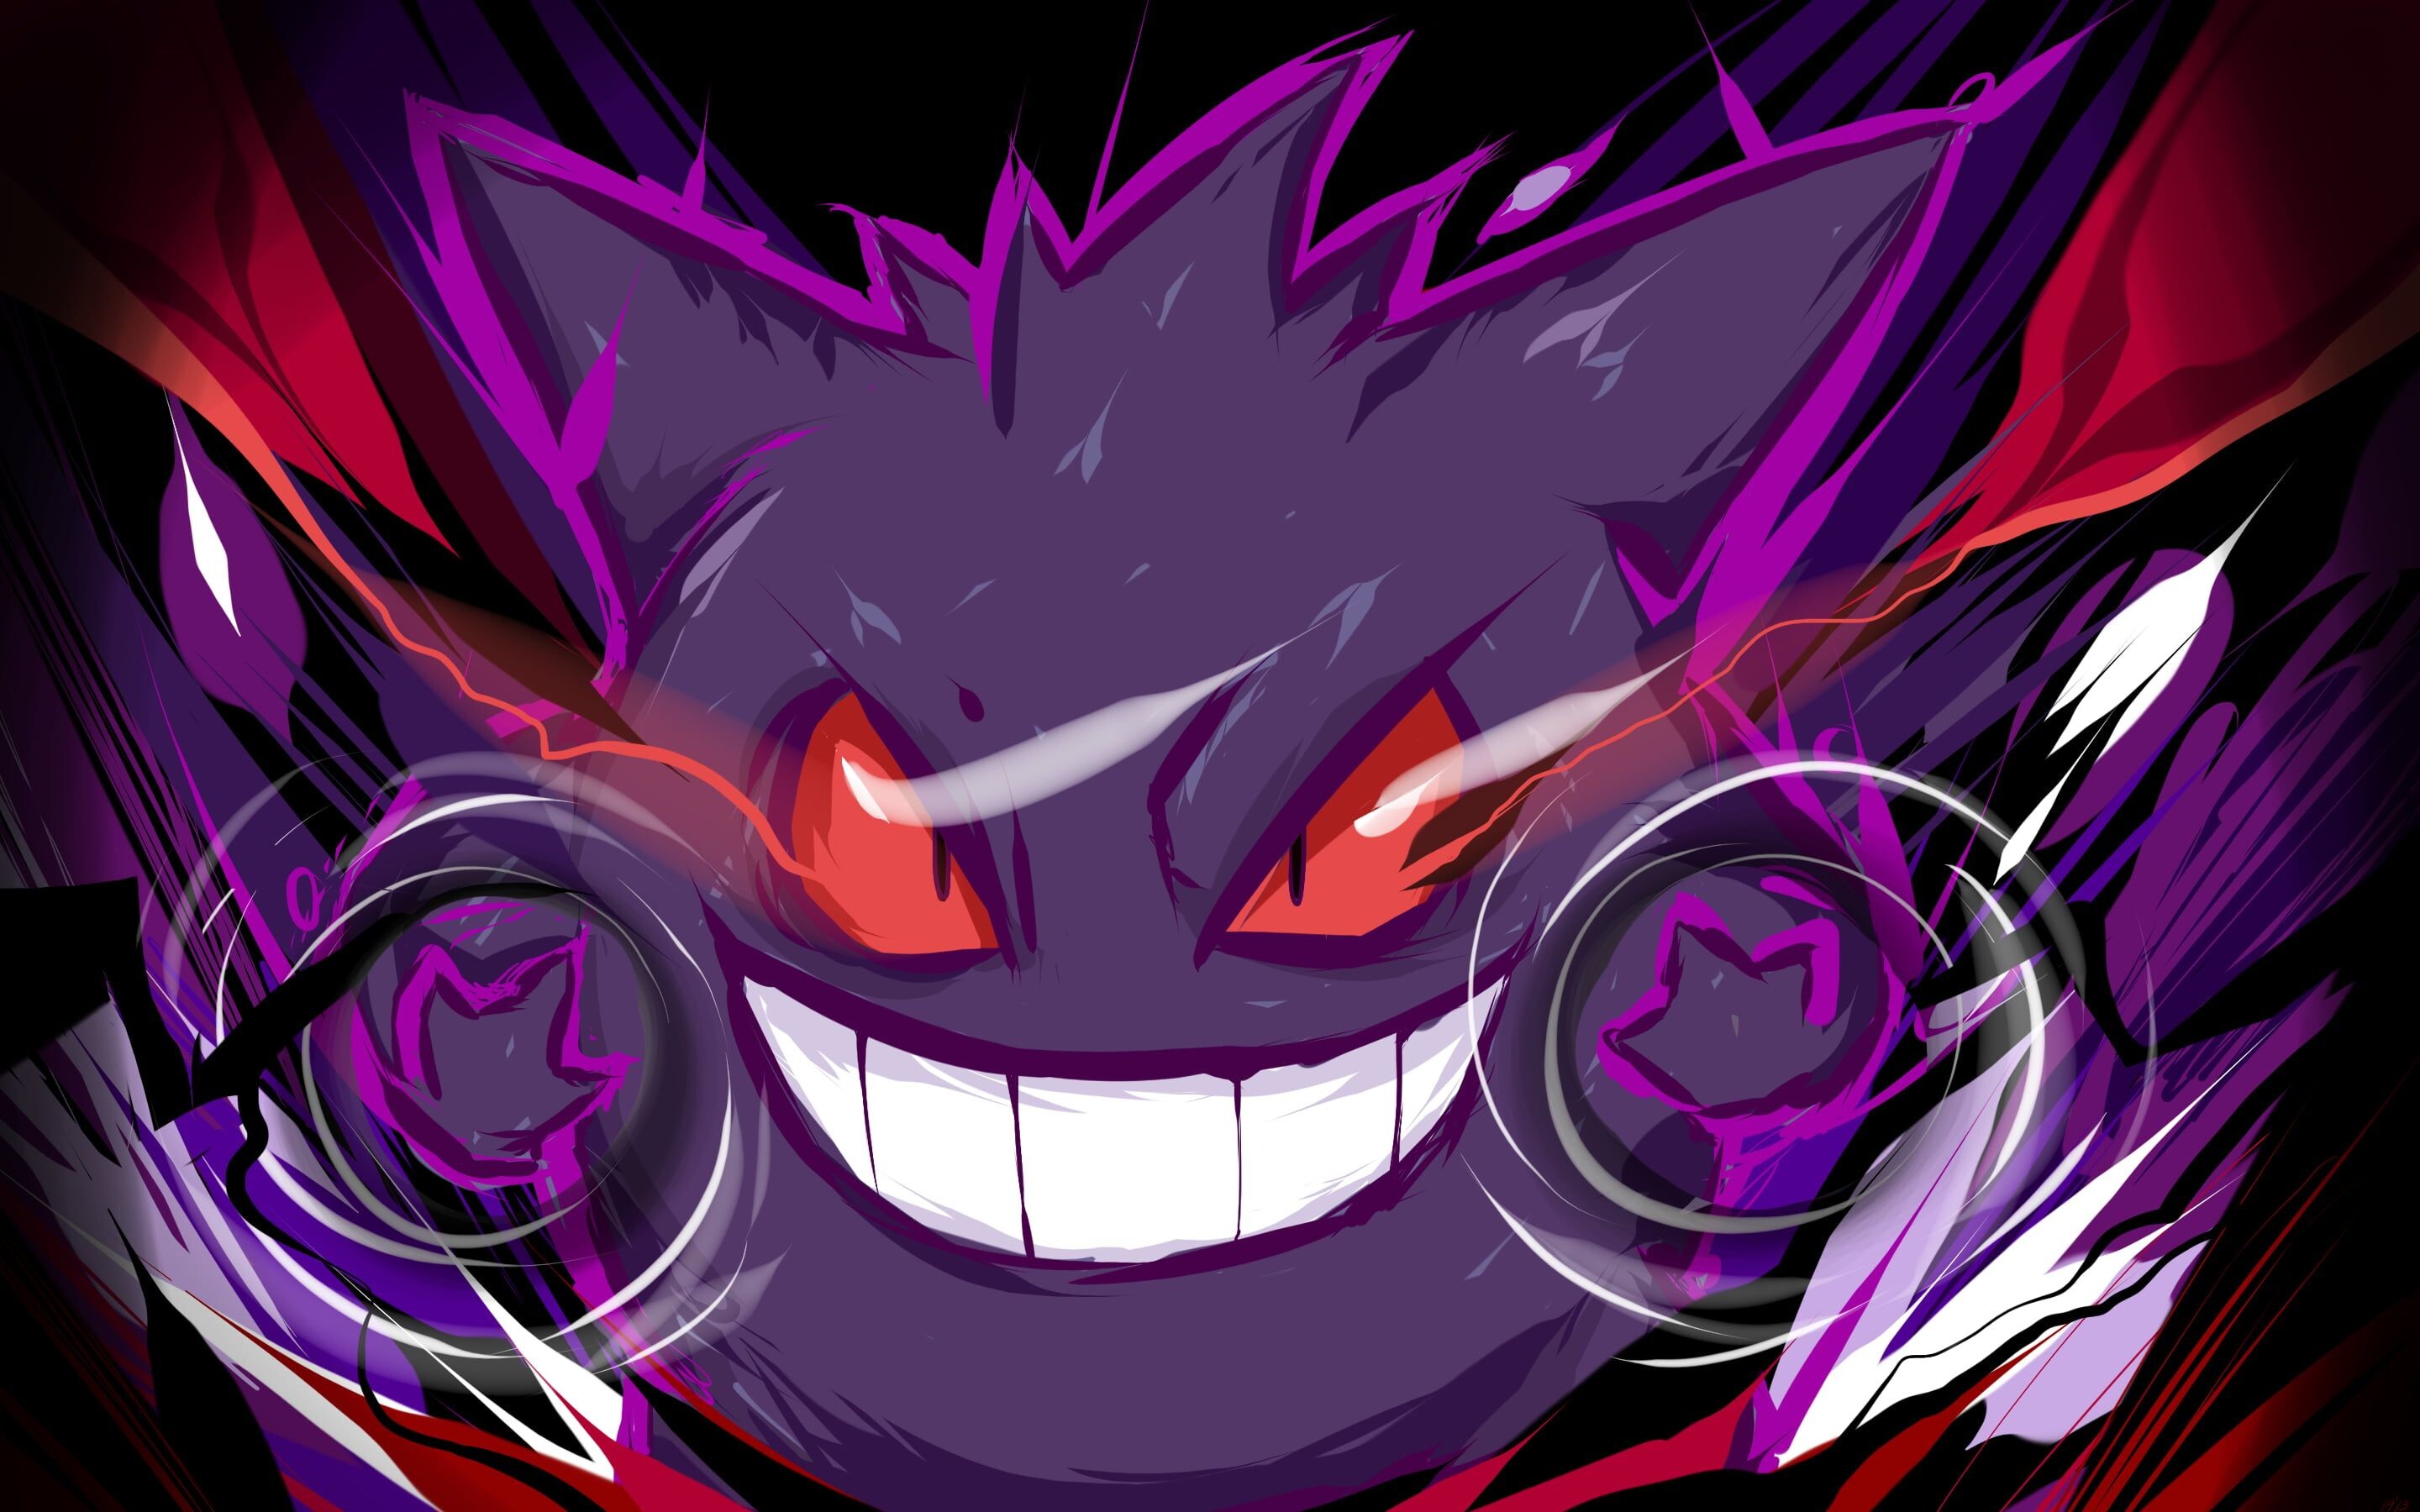 Gengar: The ability to hide perfectly in the shadow of any object, Granting it exceptional stealth, Pokedex # 094. 2880x1800 HD Wallpaper.